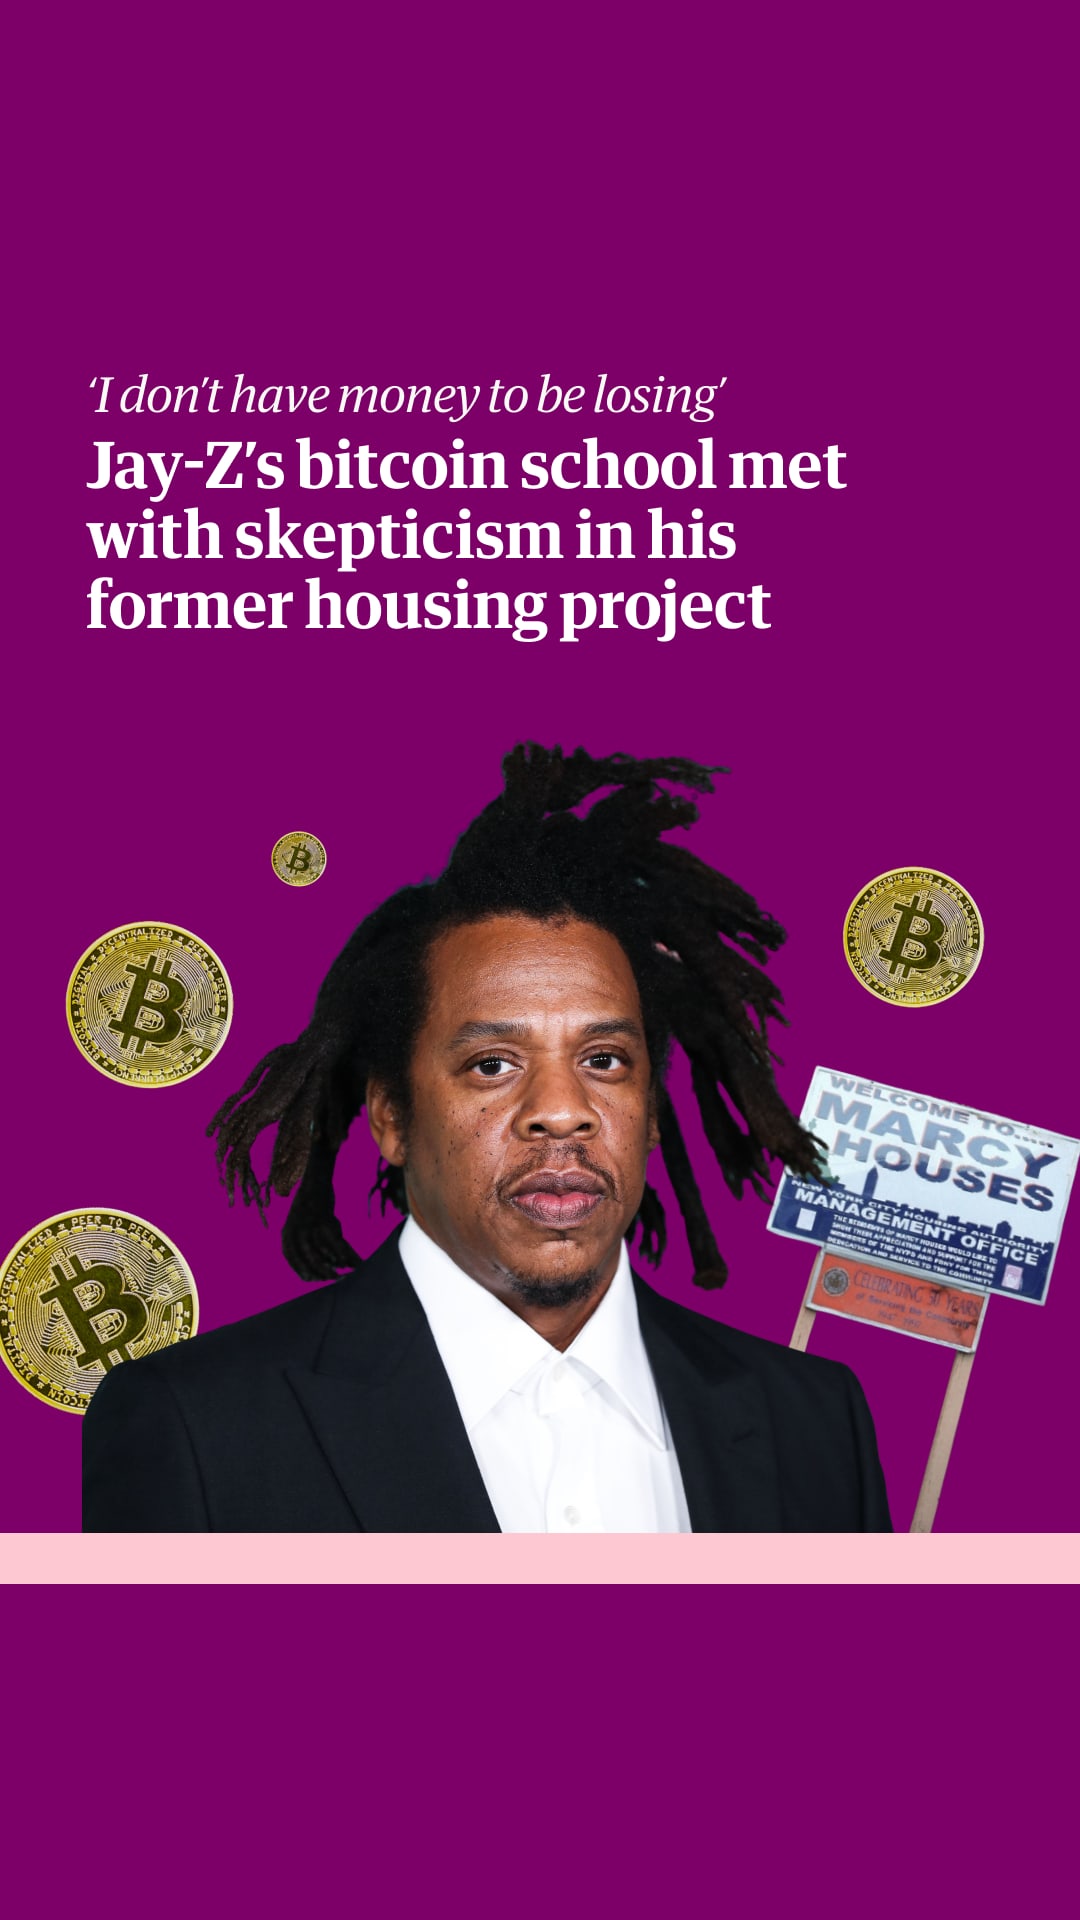 Jay-Z's bitcoin school met with skepticism in his former housing project:  'I don't have money to be losing', Jay-Z